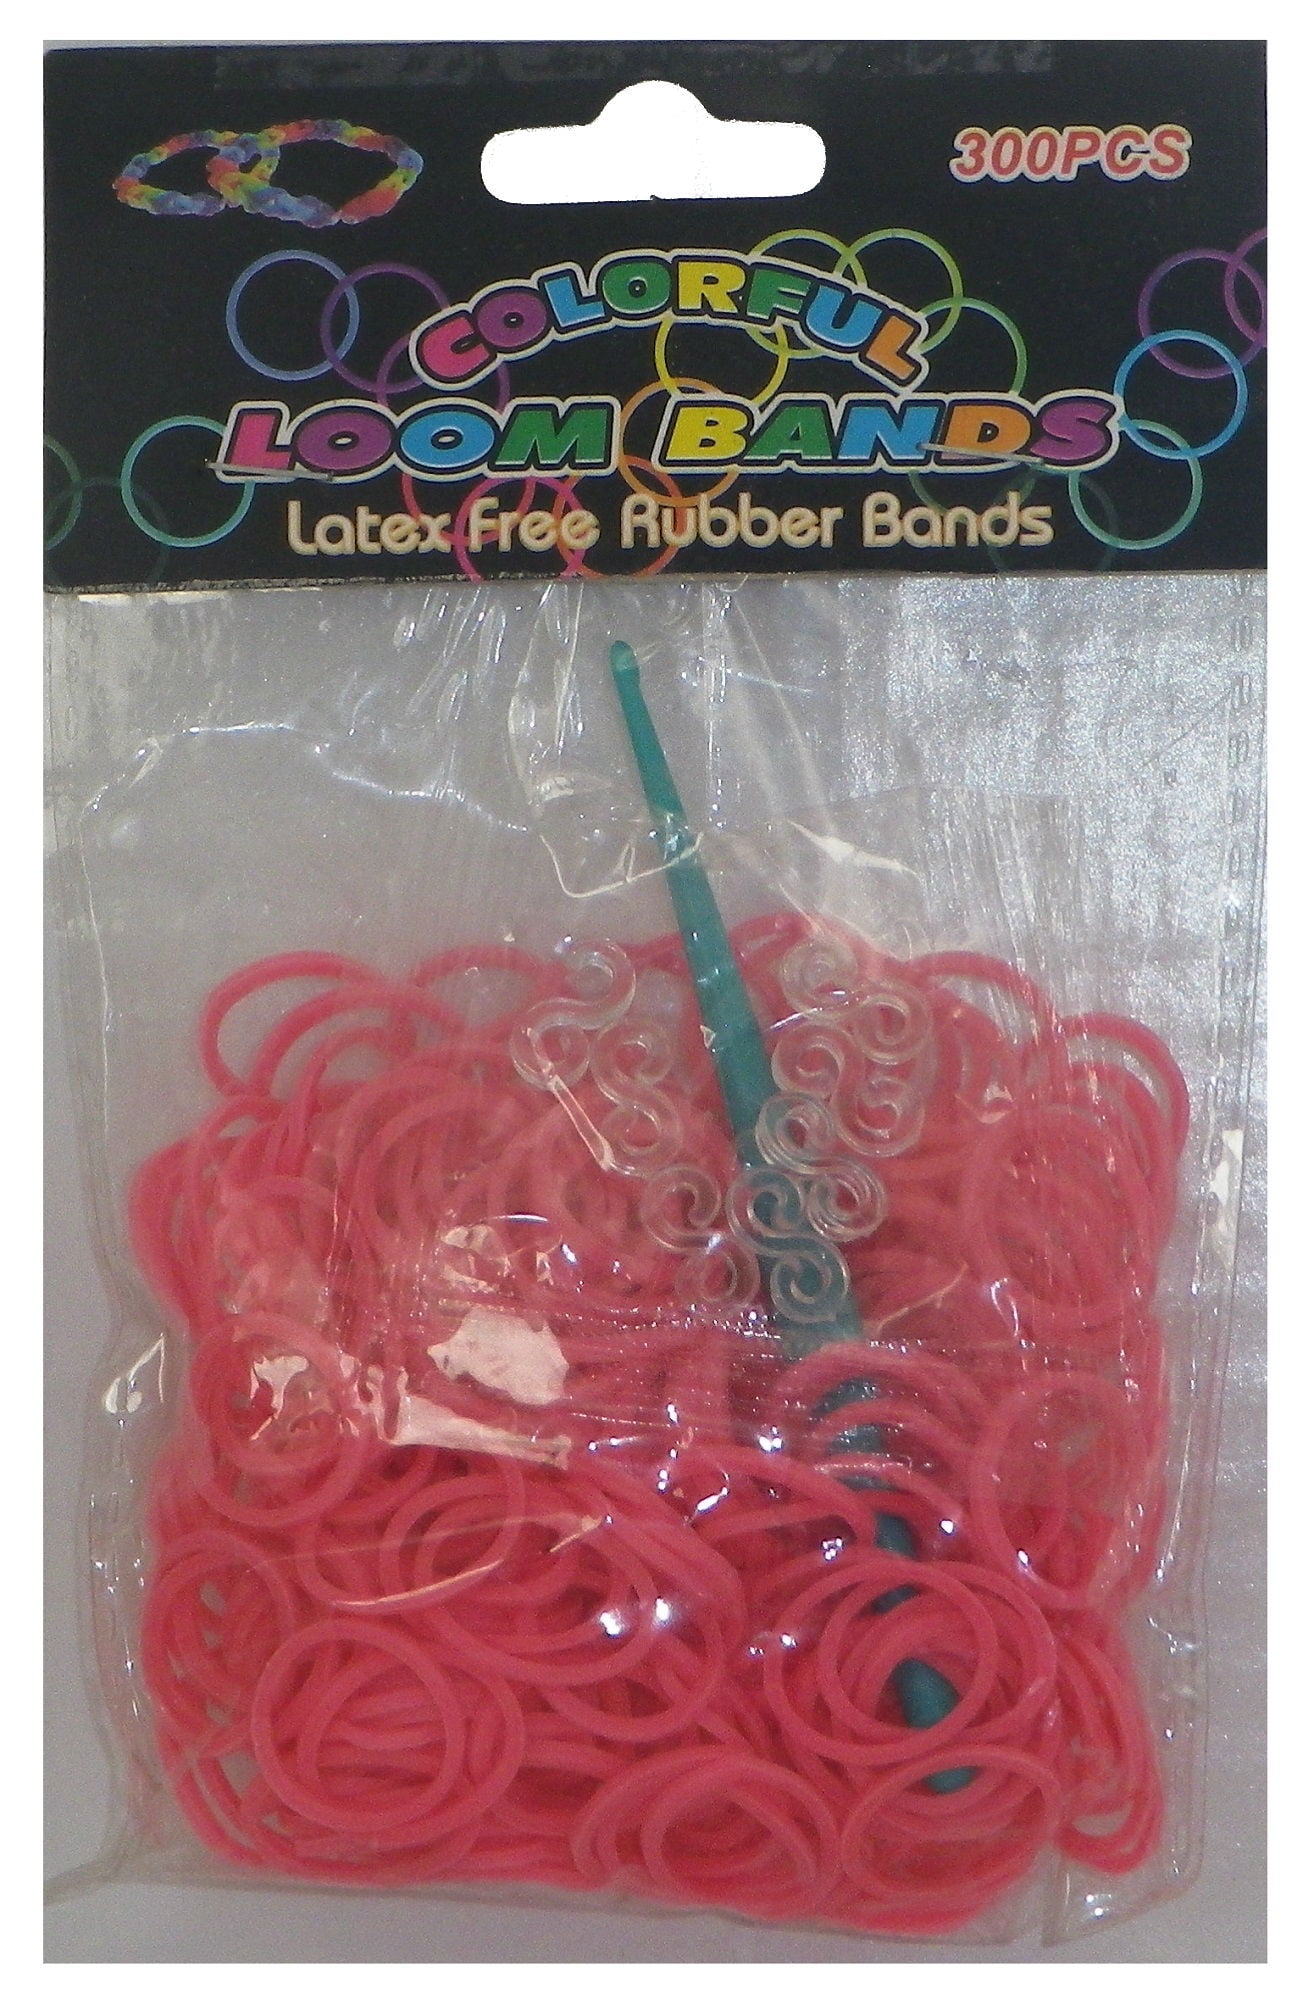 The Beadery Wonder Loom Kit, Gift for Kids, Includes 600 Rubber Bands 